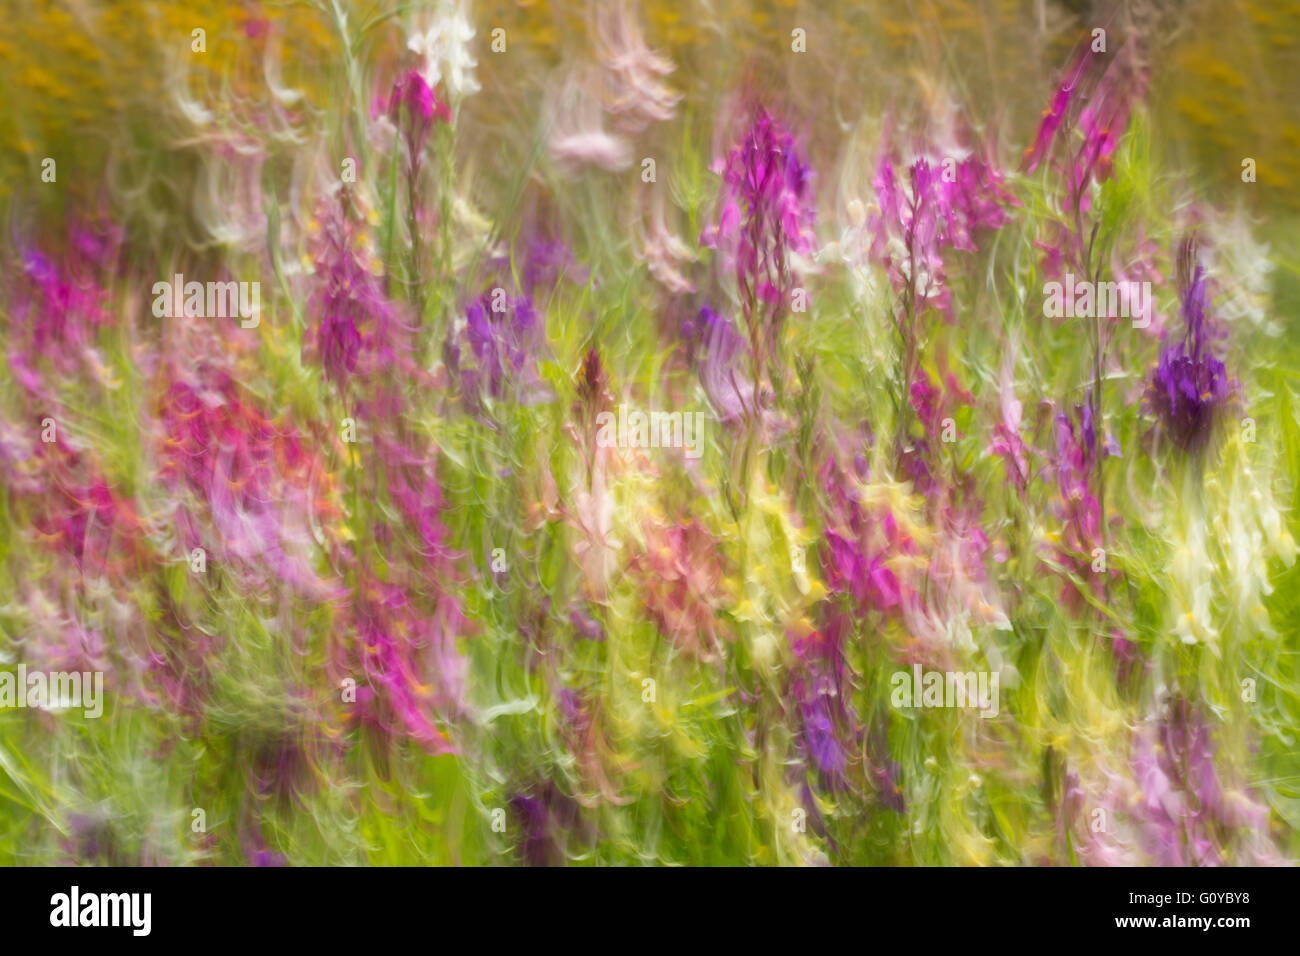 Fairy toadflax, Linaria, Linaria moroccanan , Annual, Beauty in Nature, Blur, Blurred, Colour, Contemporary, Cottage garden plant, Creative, Dreamlike, Flower, Summer Flowering, Frost hardy, Growing, Motion, Movement, Outdoor, Painterly, Pastel Colour, Plant, Mixed colours, Stock Photo